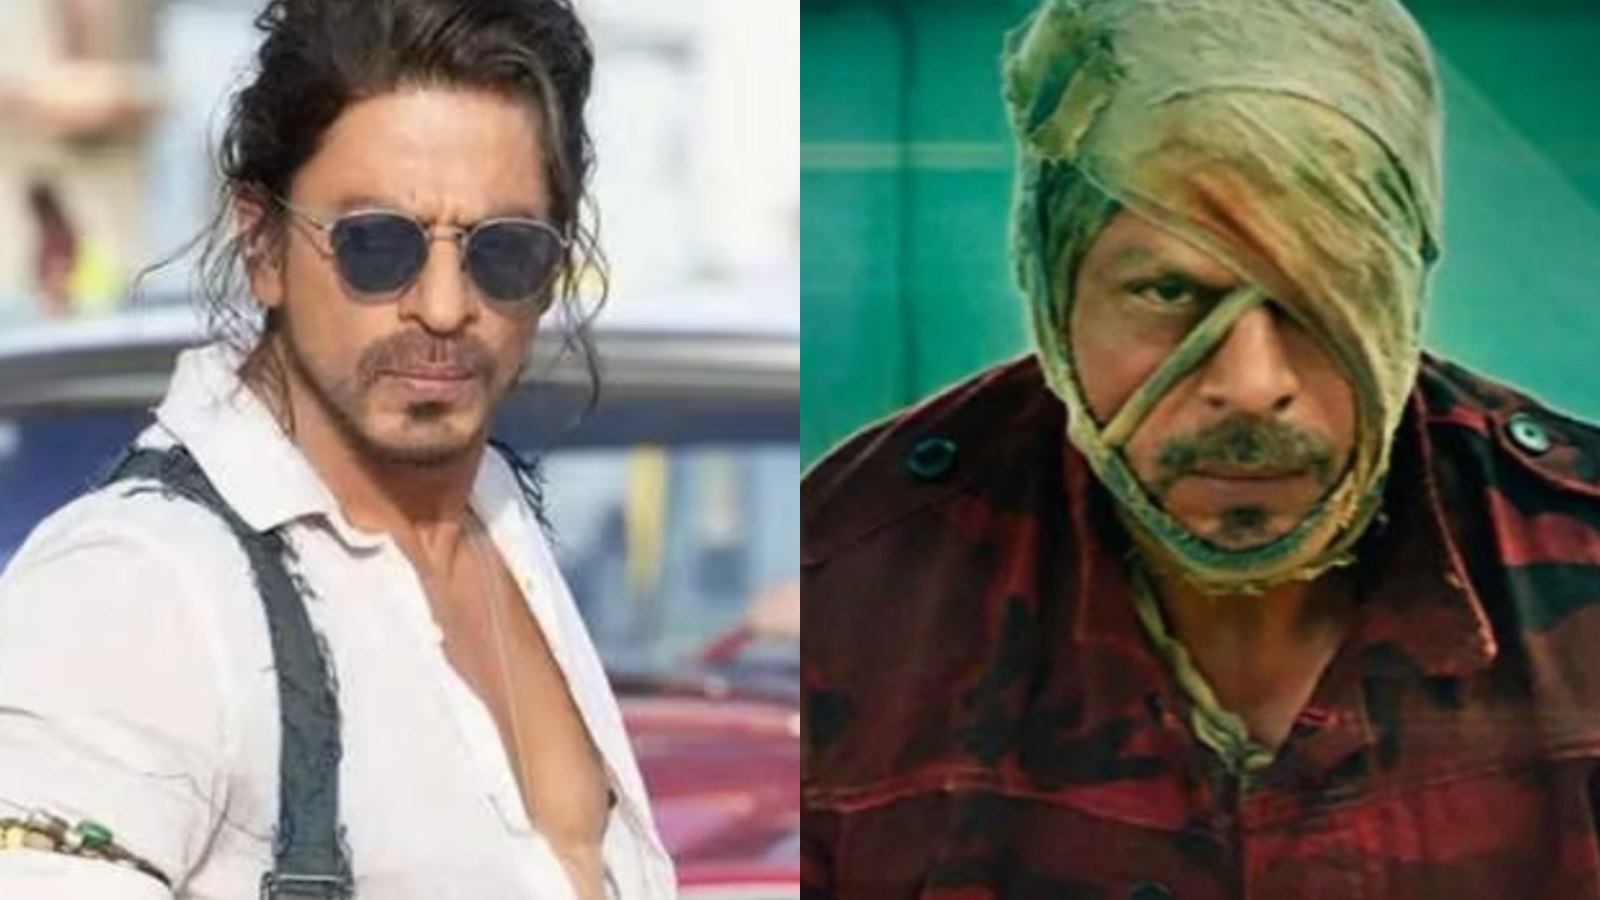 Shah Rukh Khan's Jawan and Pathaan to compete against John Wick 4 and